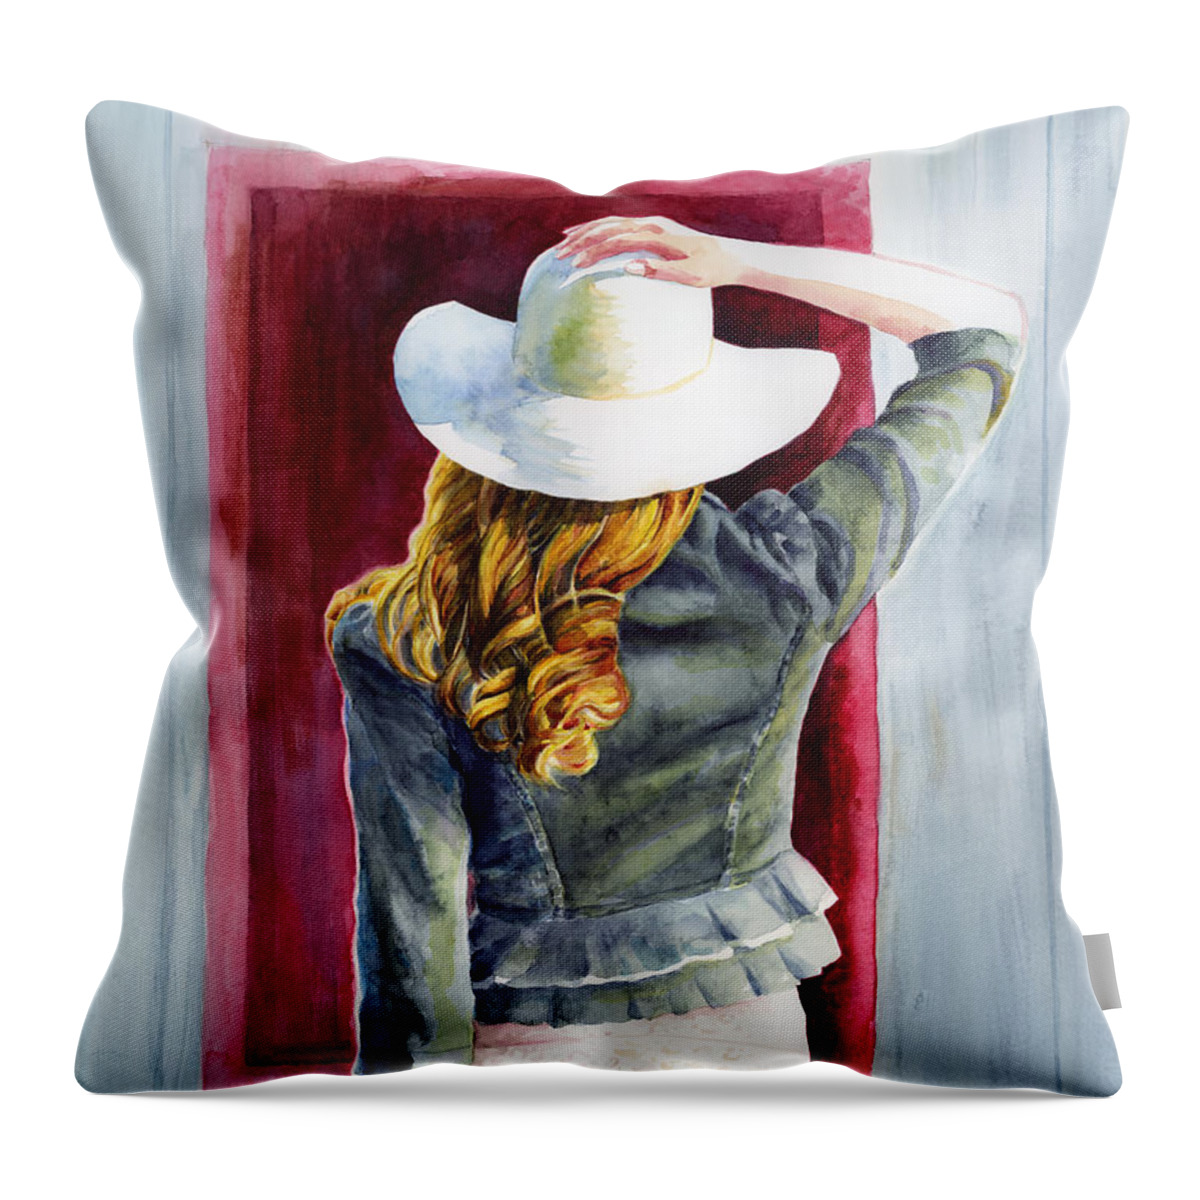 Girl Throw Pillow featuring the painting Window of Time by Hailey E Herrera